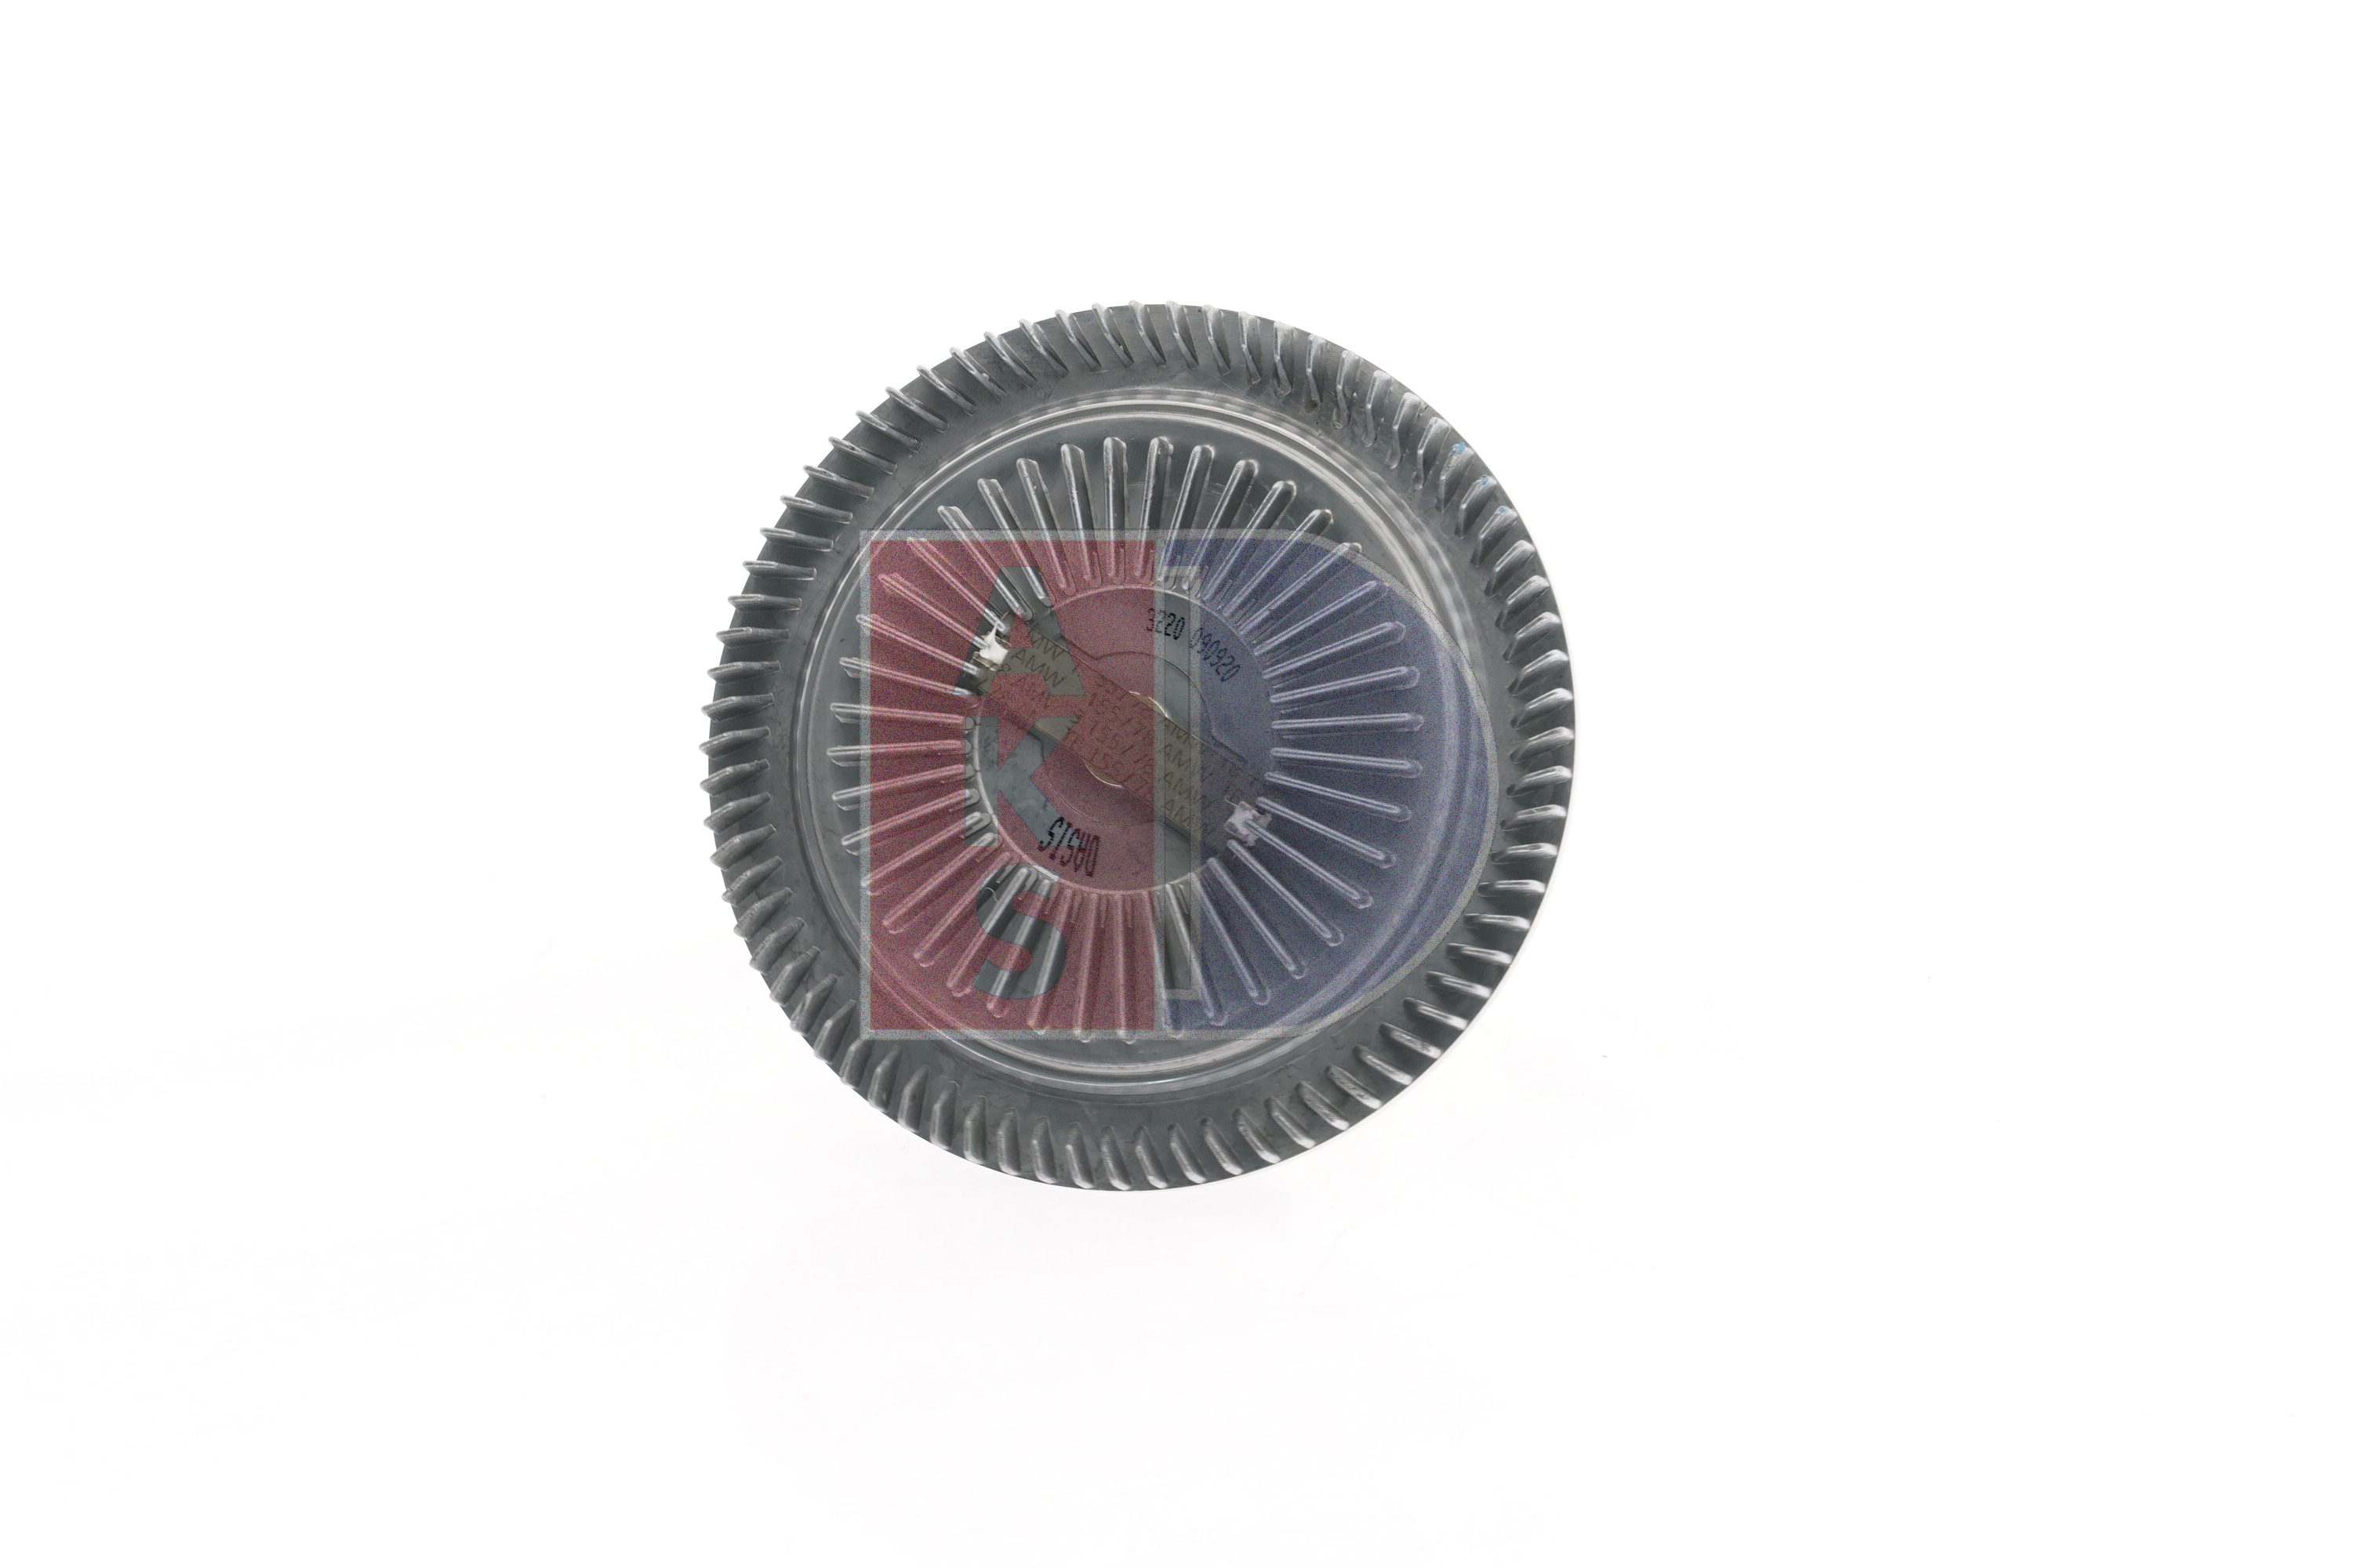 AKS DASIS 378028N Fan clutch LAND ROVER experience and price